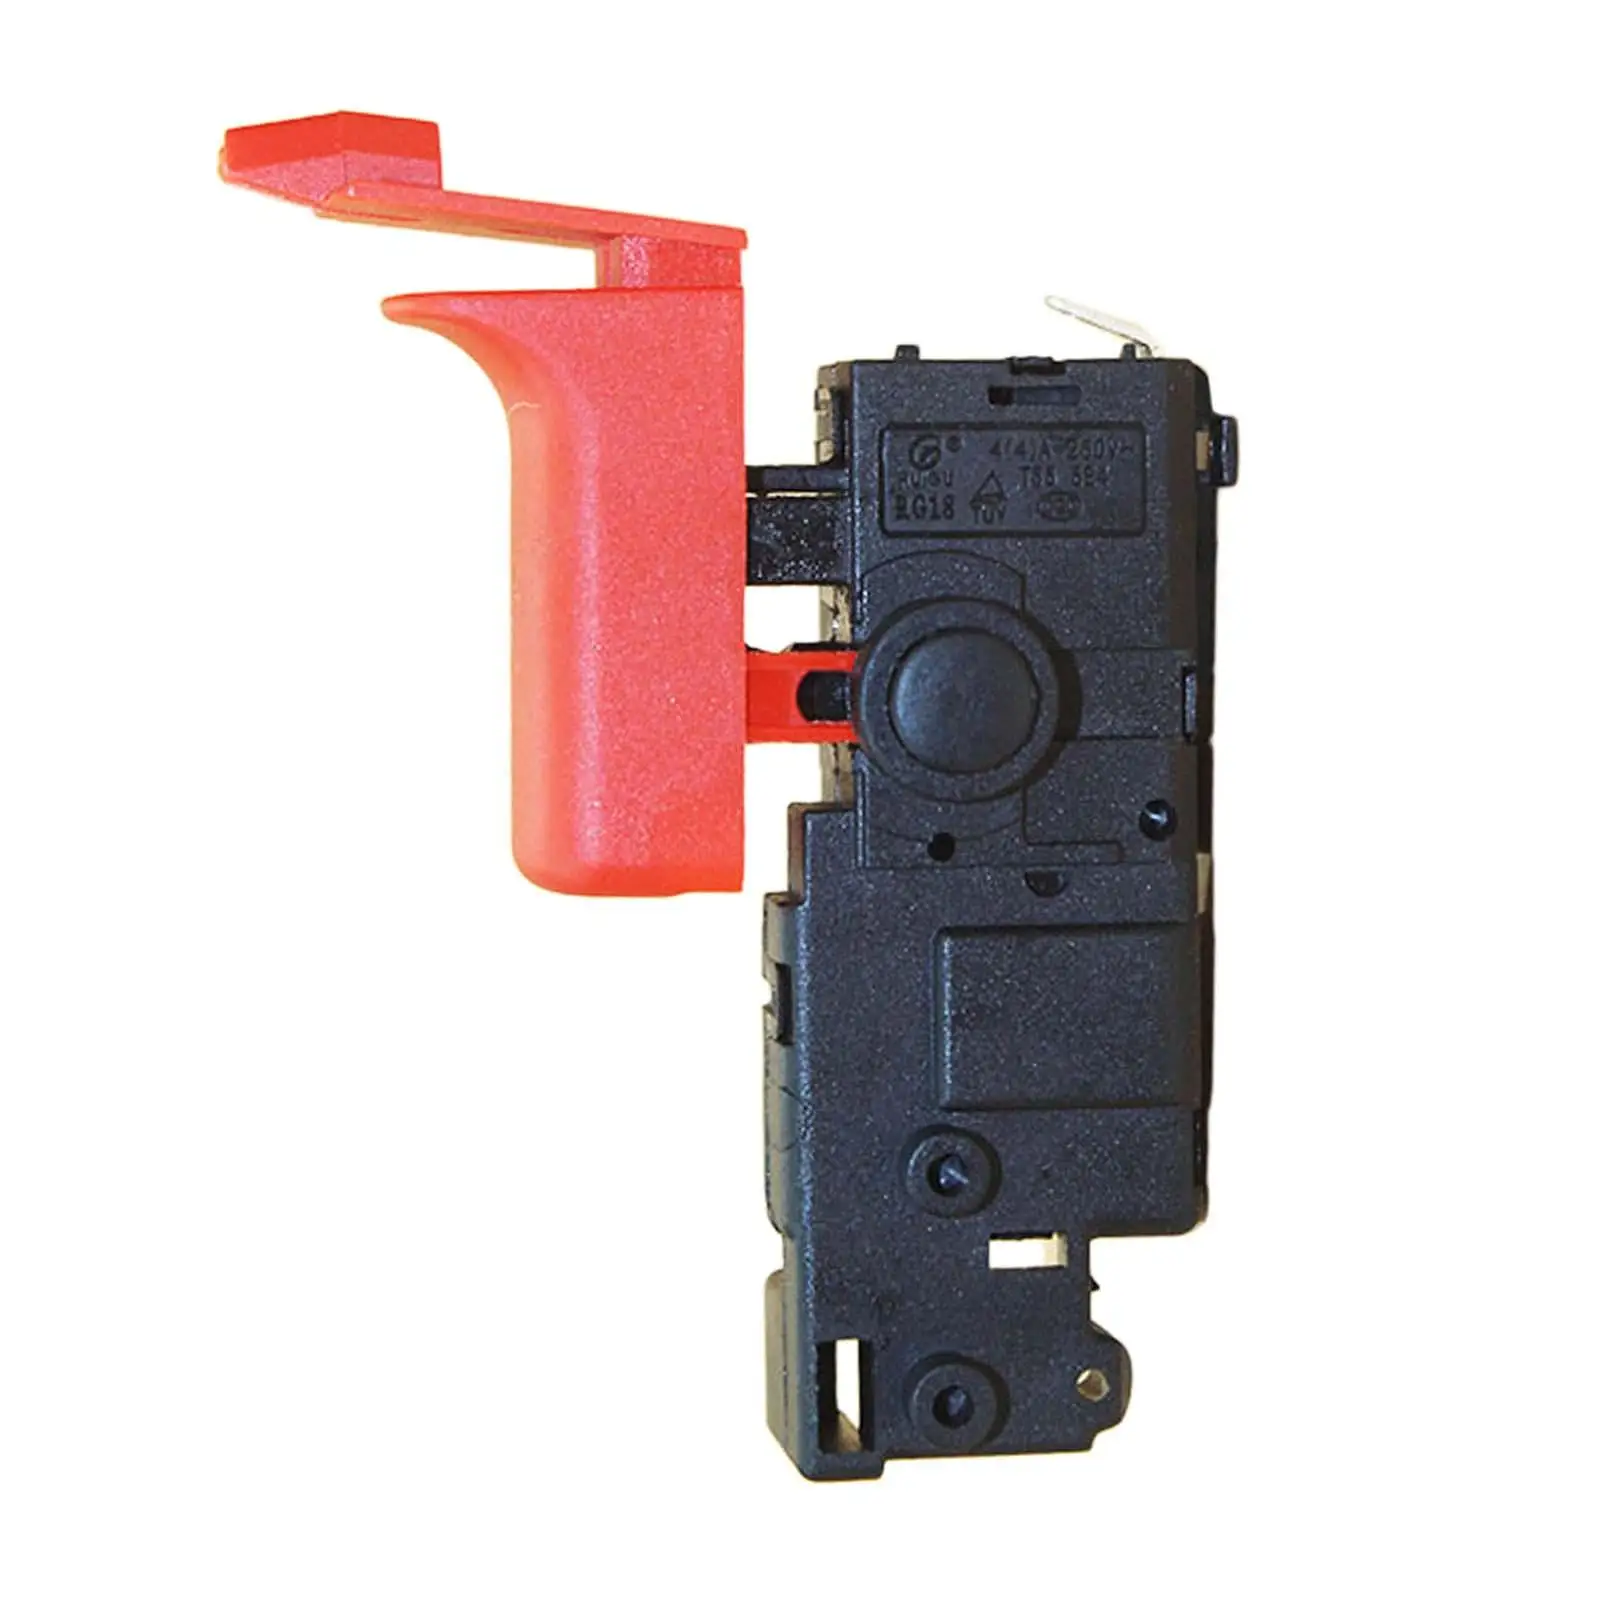 Professional Rotory Hammer Switch Hammer Replacement Control Power Tools Supplies Switch Replacement Rotary for Gbh 2-28 D/22/26